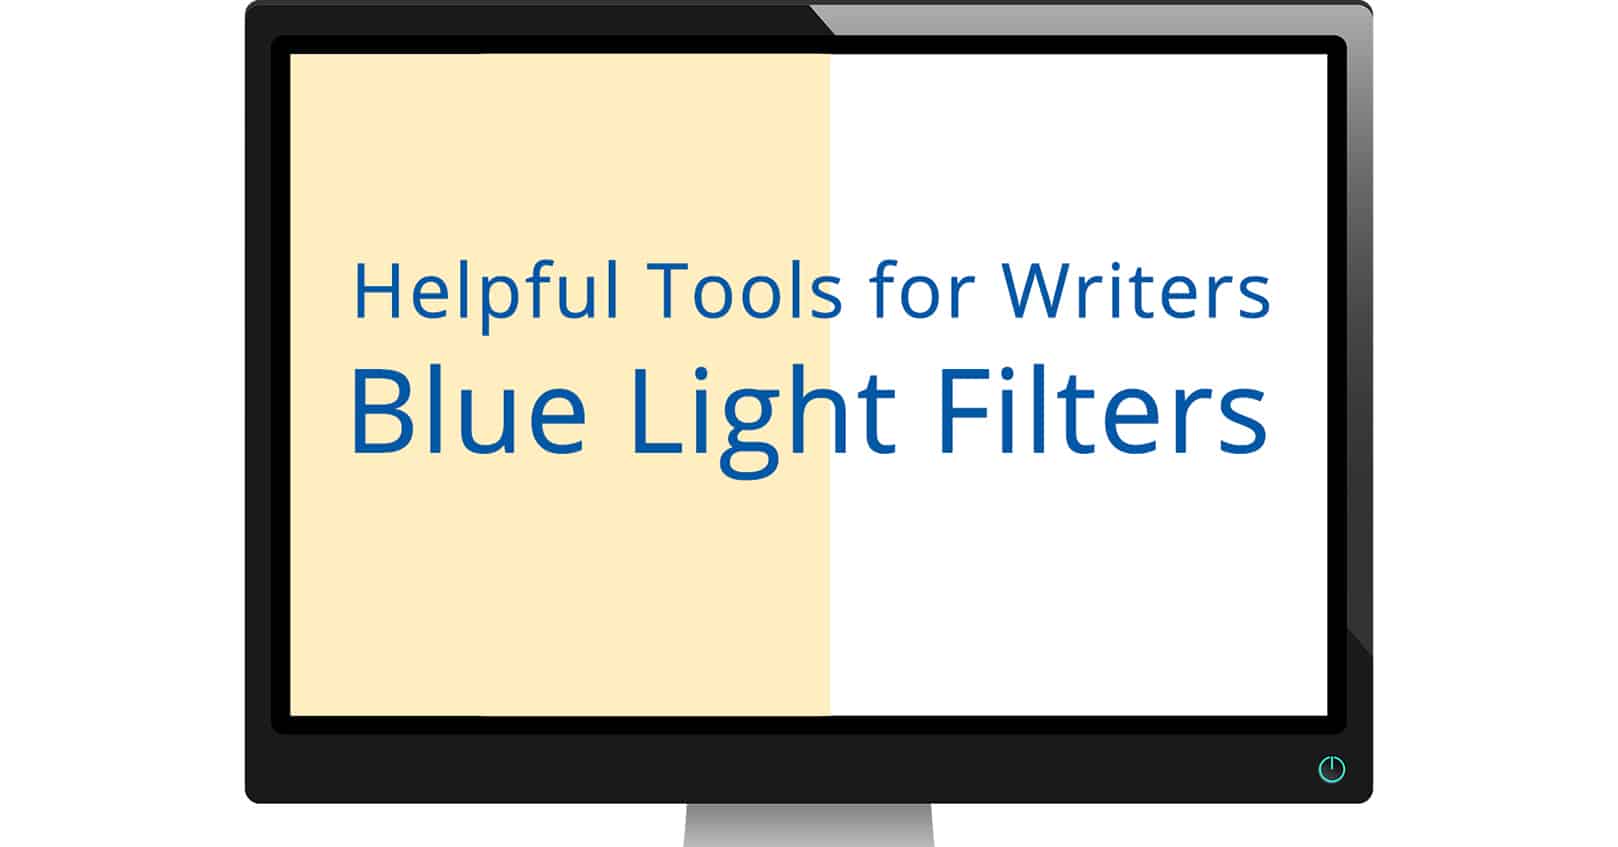 tools for writers: blue light filters